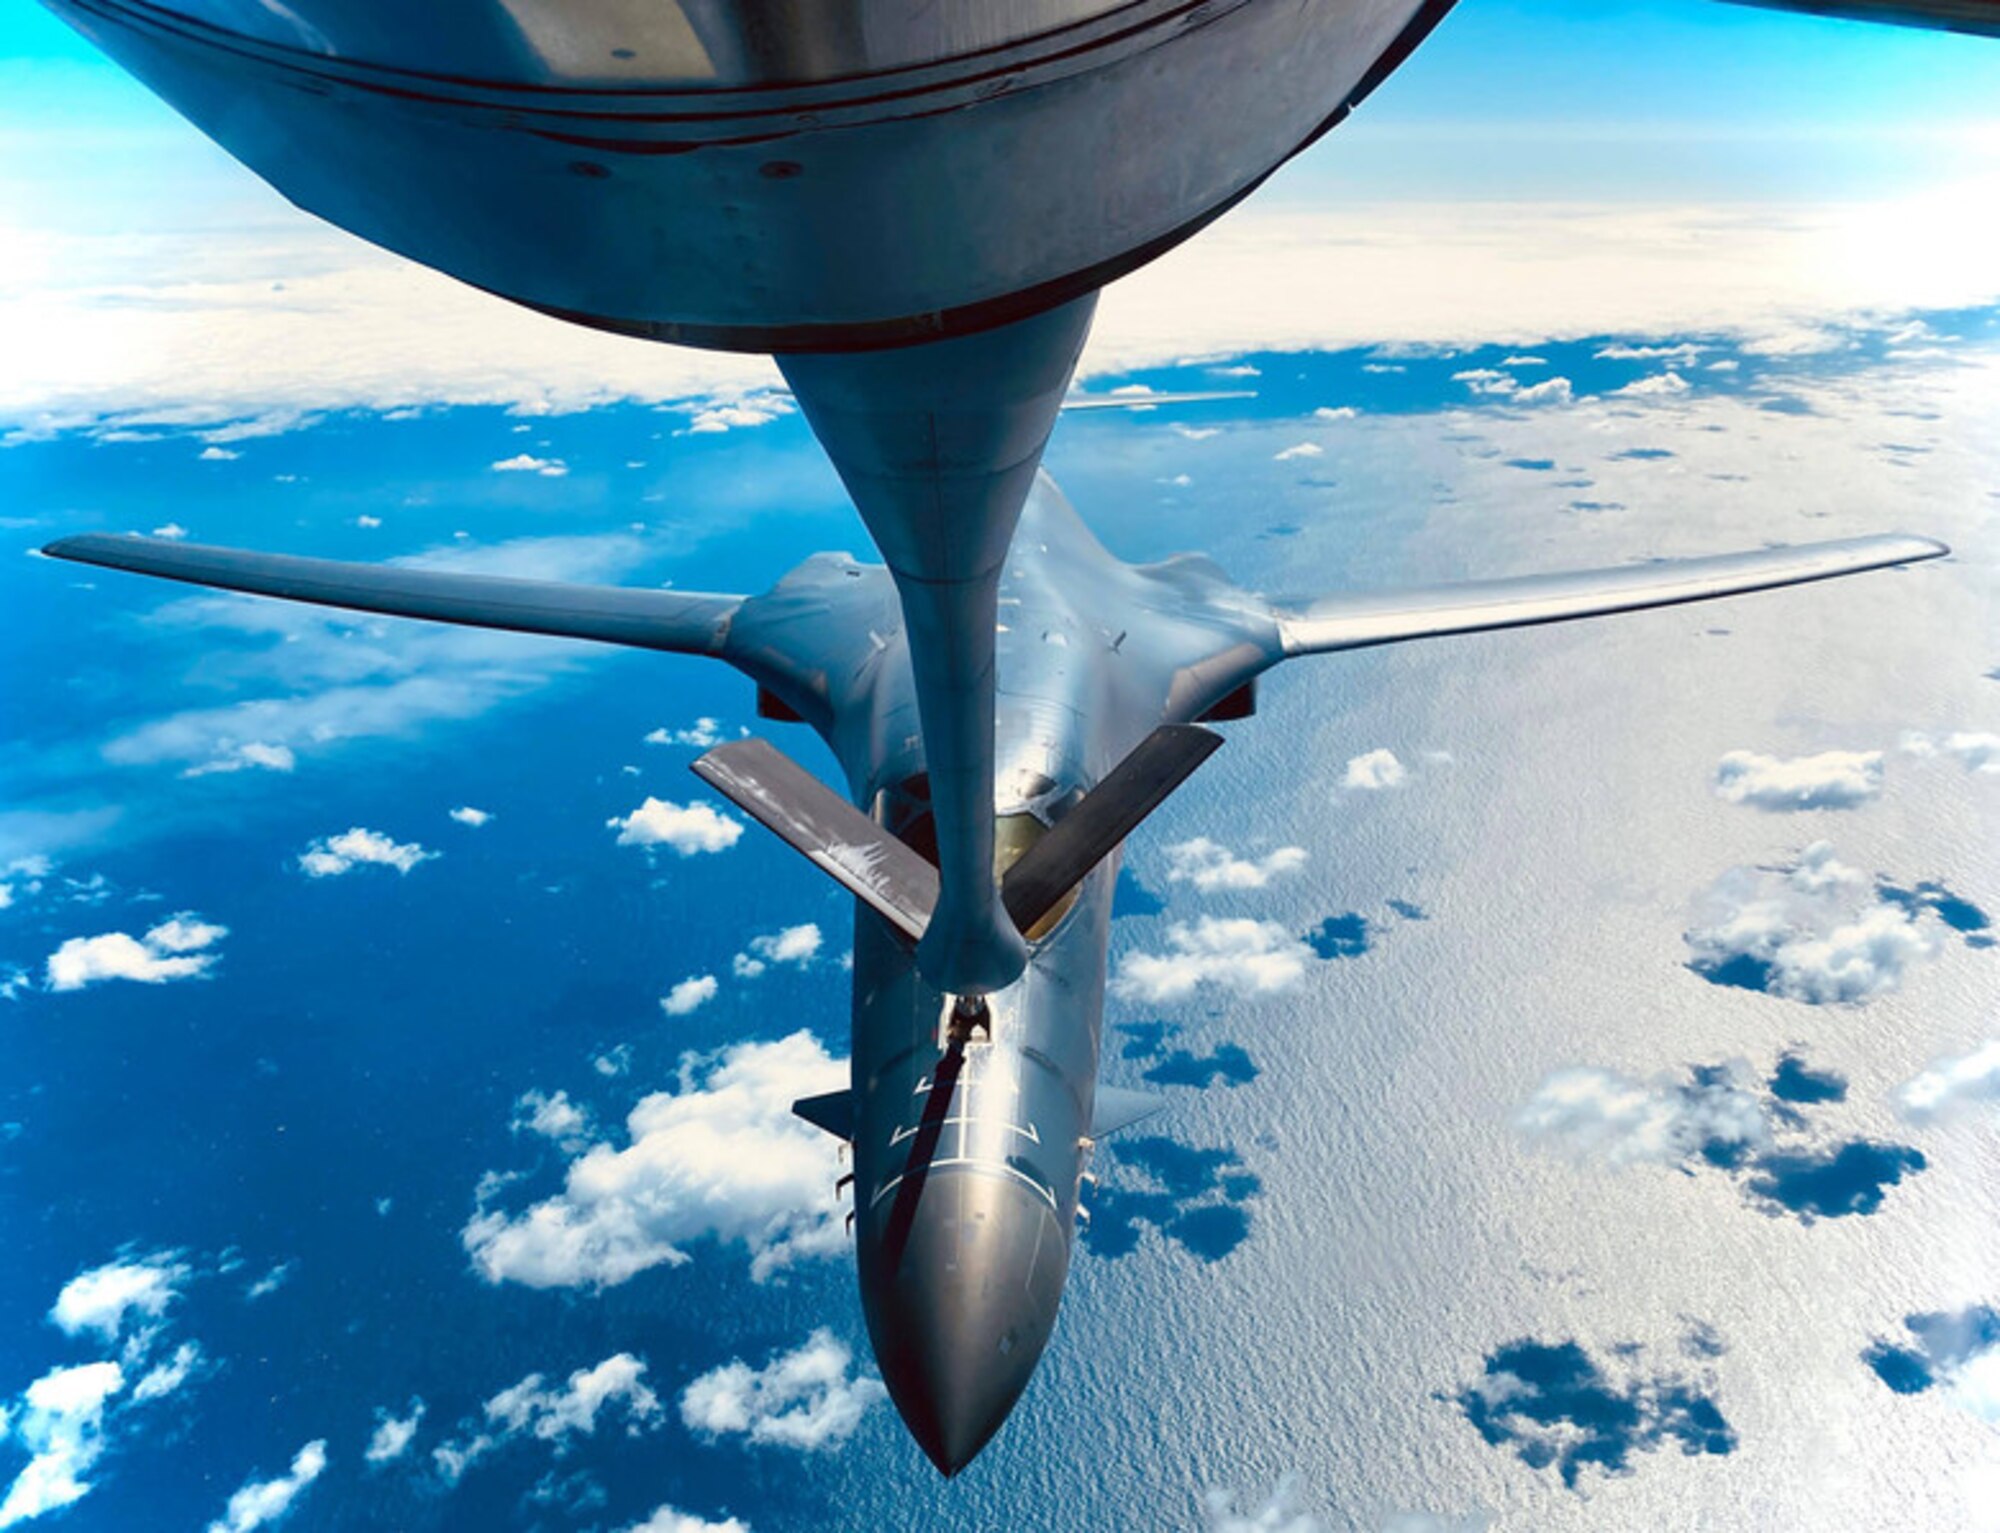 A B-1B Lancer from the 28th Bomb Wing, Ellsworth Air Force Base, South Dakota, receives fuel from a KC-135 Stratotanker from the 100th Air Refueling Wing, RAF Mildenhall, England, during a training mission for Bomber Task Force Europe over England, May 11, 2020.